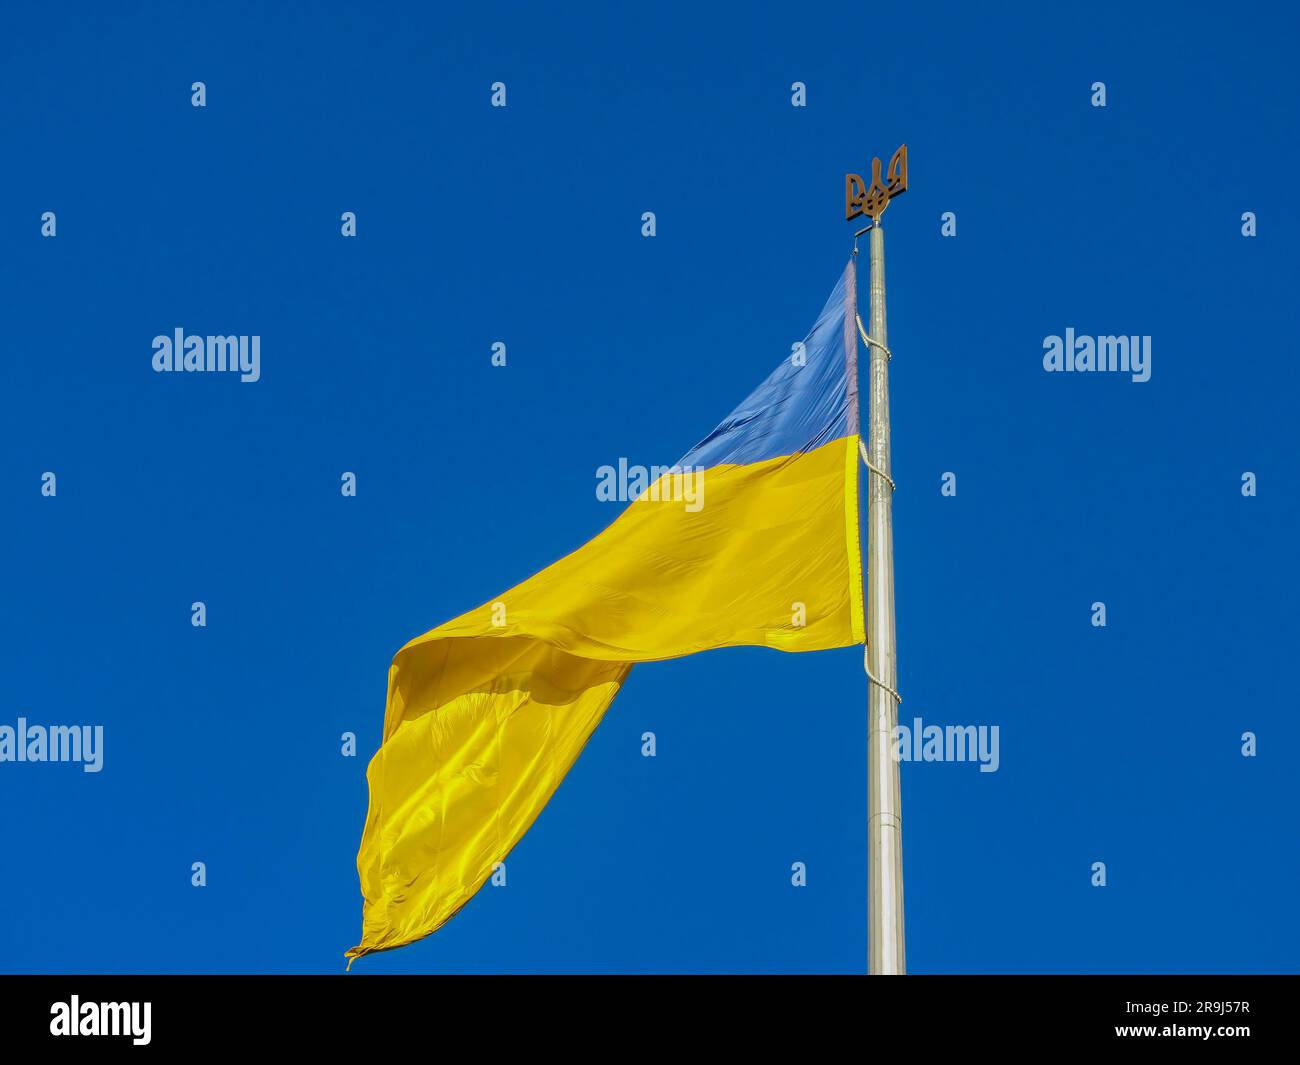 Ukraine flag large national symbol fluttering in blue sky. Large yellow blue Ukrainian state flag, Dnipro city, Independence Constitution Day, Nationa Stock Photo